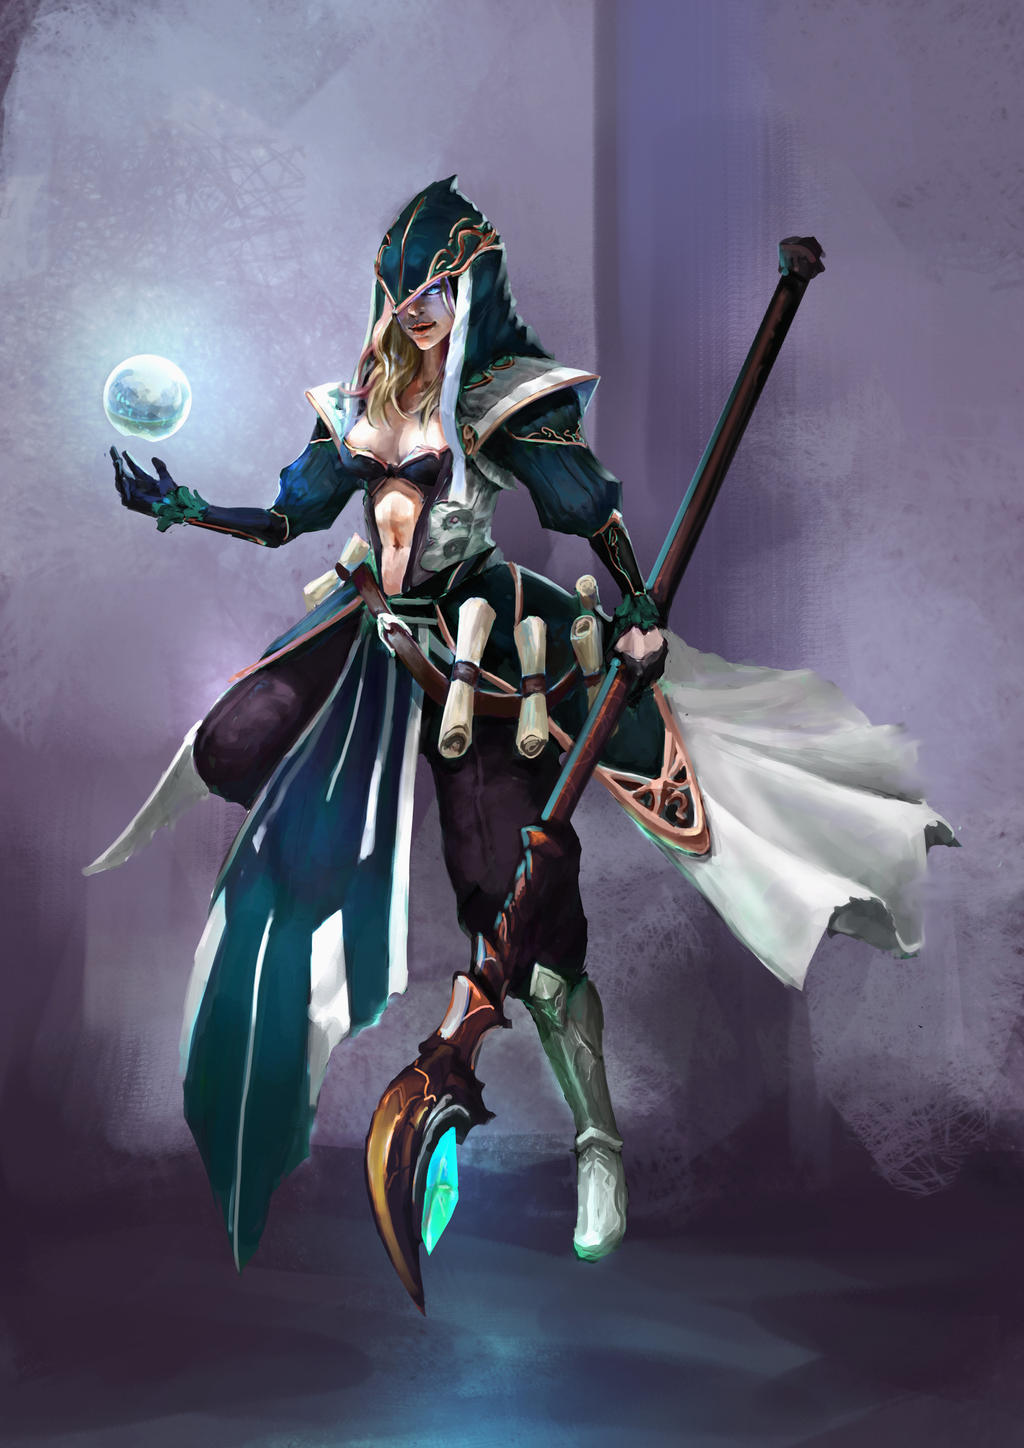  Mage  Character Concept  by jeffchendesigns on DeviantArt